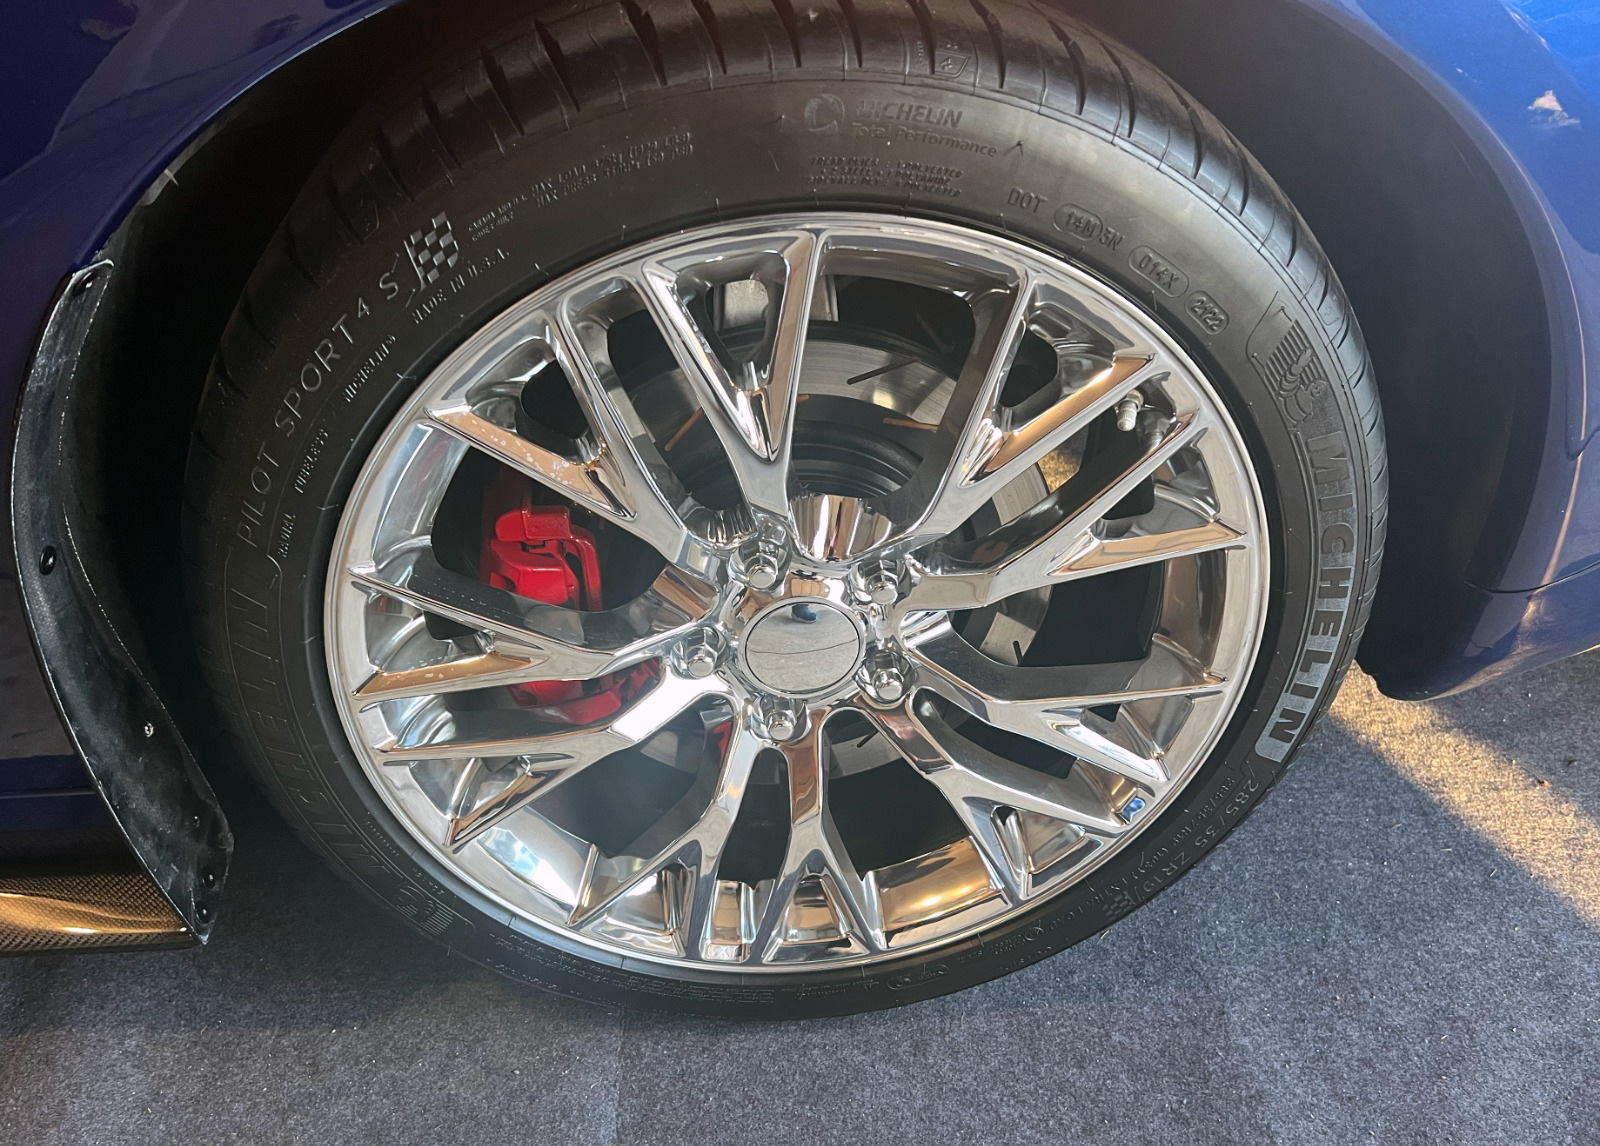 Like New - C6 Corvette Wheel and Tire Package (~4k miles total)